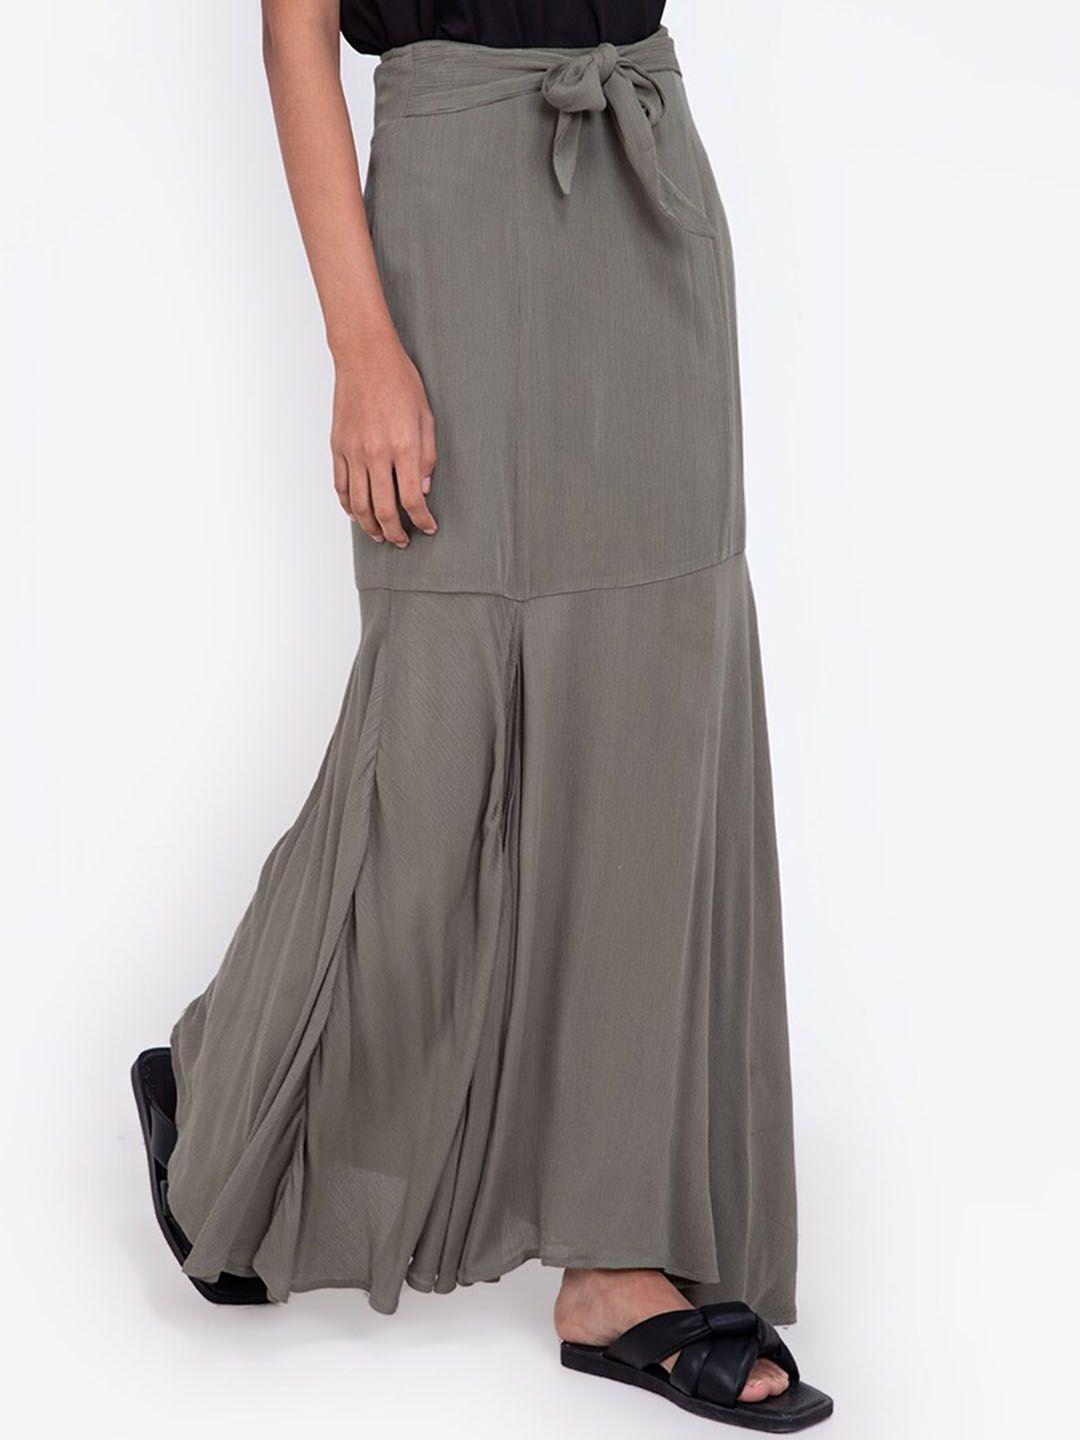 zalora basics women olive green solid flared maxi skirt with tie-up detail